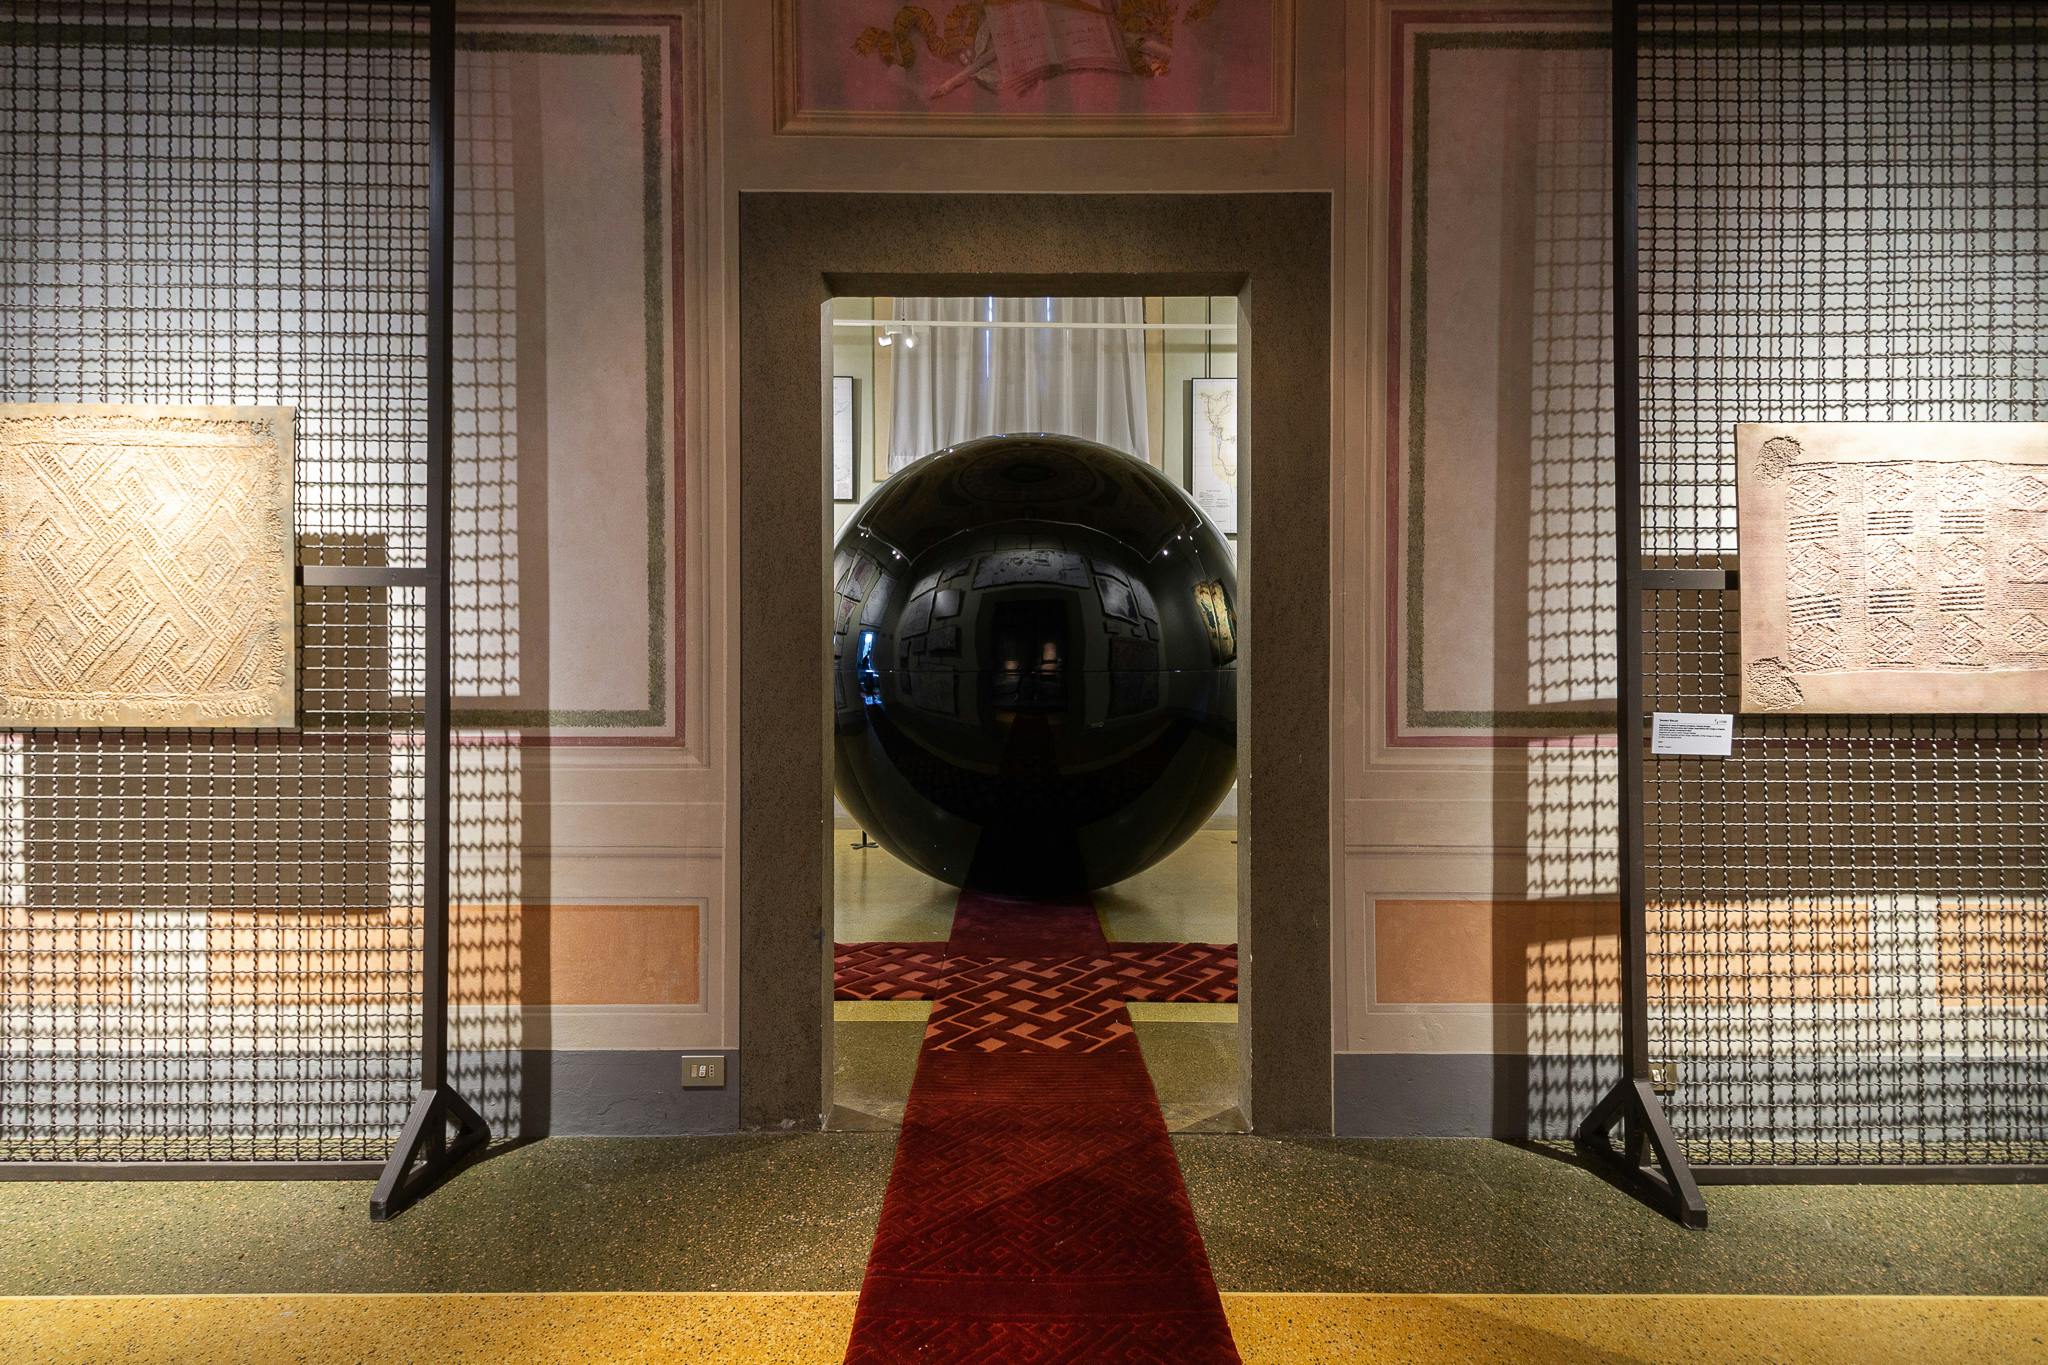 The History of the Kingdom of Congo in the Medicean residence of Palazzo Pitti: Sammy Baloji's installations tell the tale